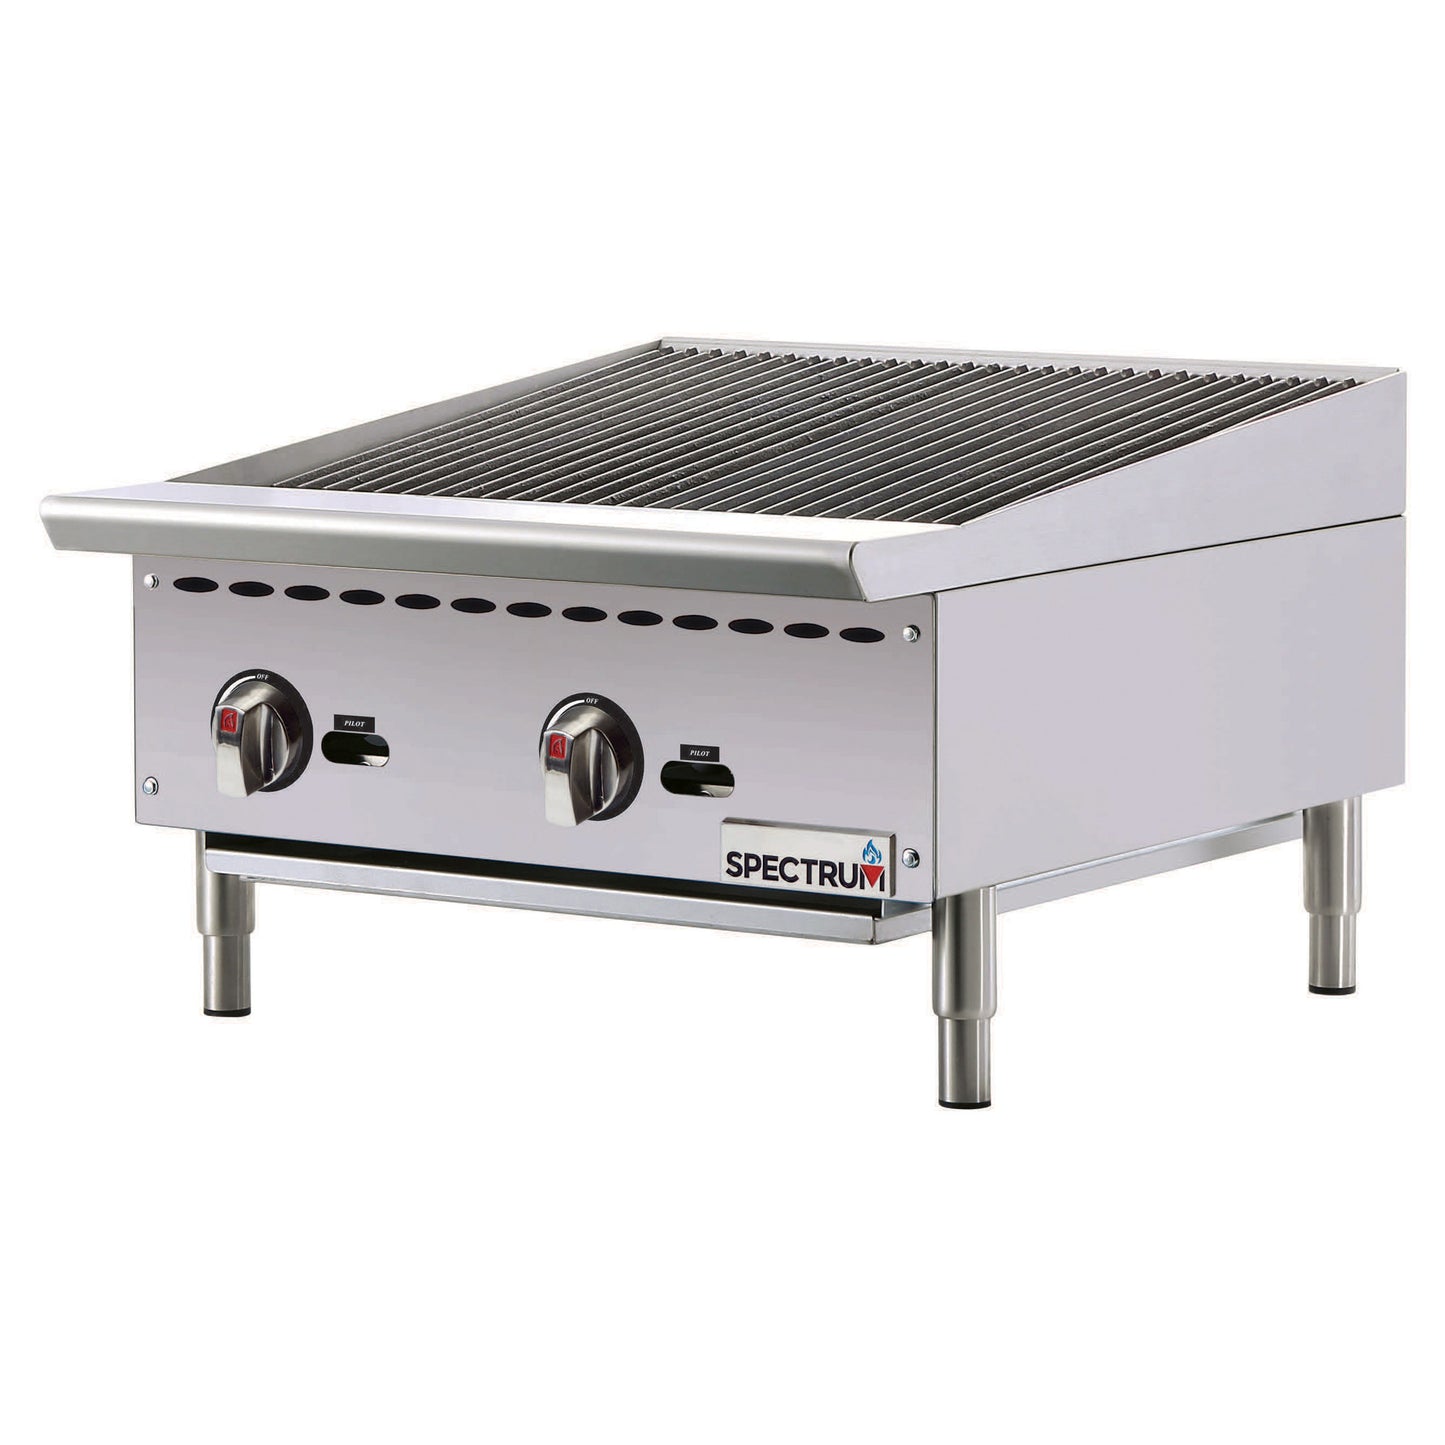 NGCB-24R - Spectrum Gas Charbroiler, 24" Wide, Natural / LP